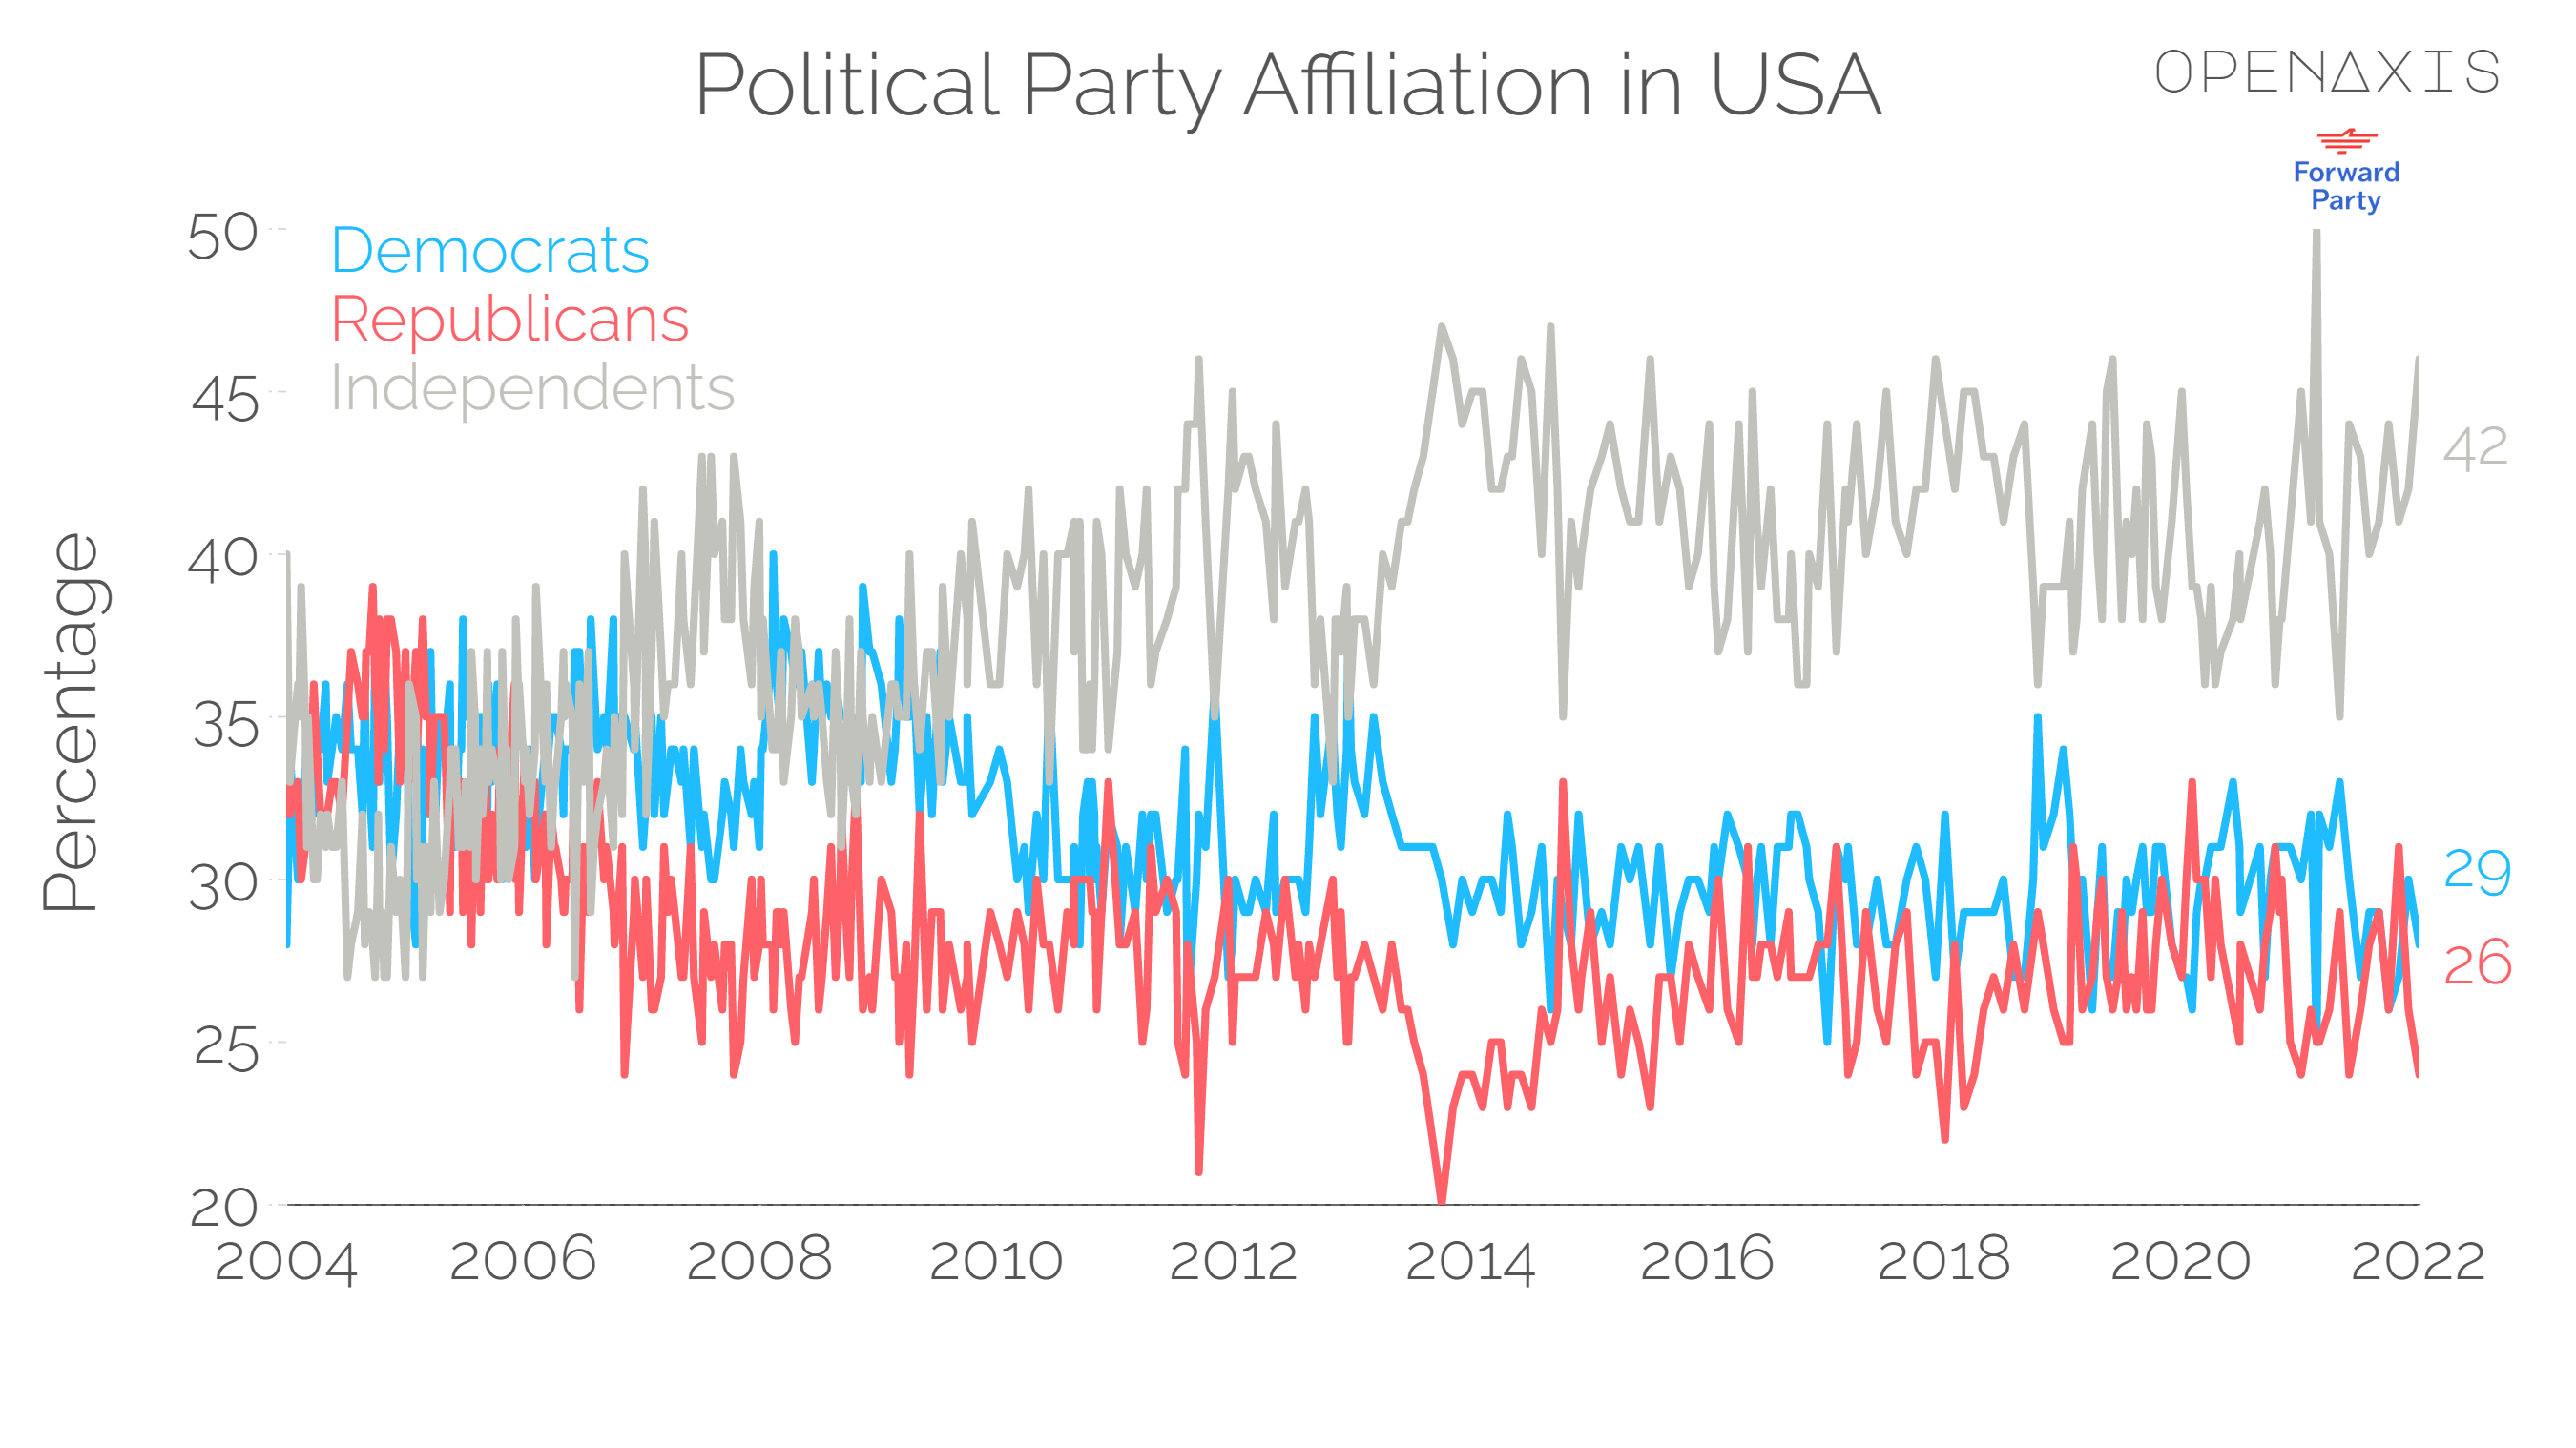 "Political Party Affiliation in USA"